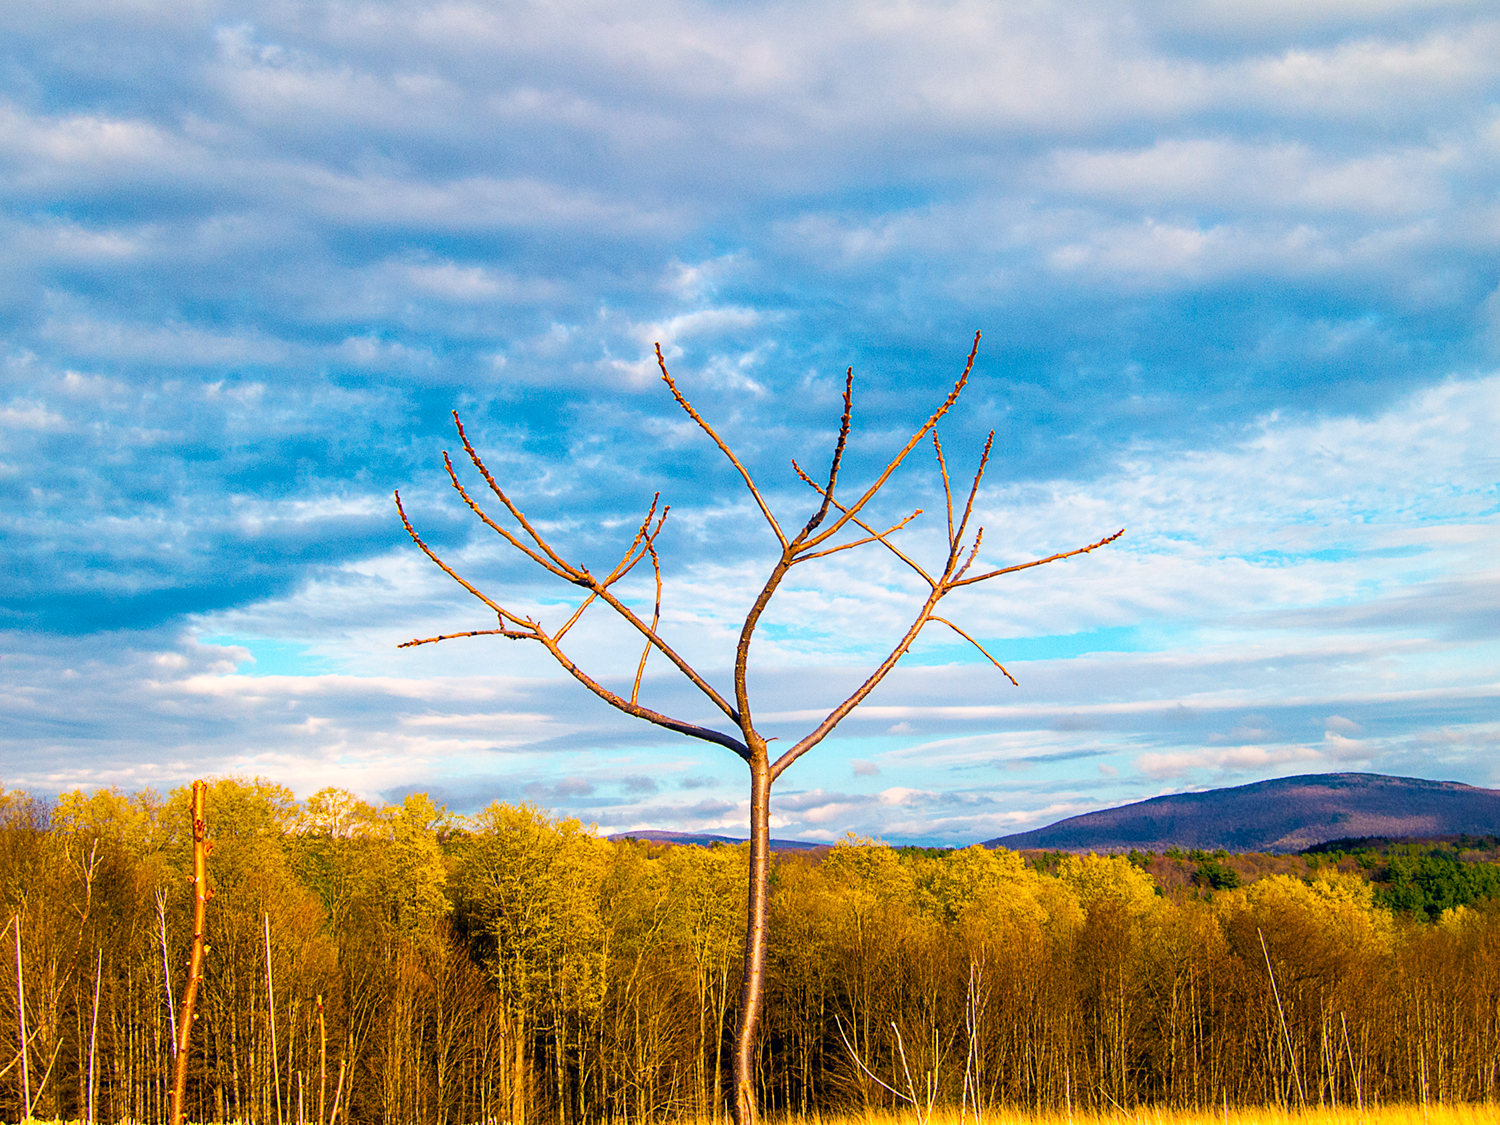 Bare Tree in the Foreground with Yellow Tress in the Background and a Cloudy Sky